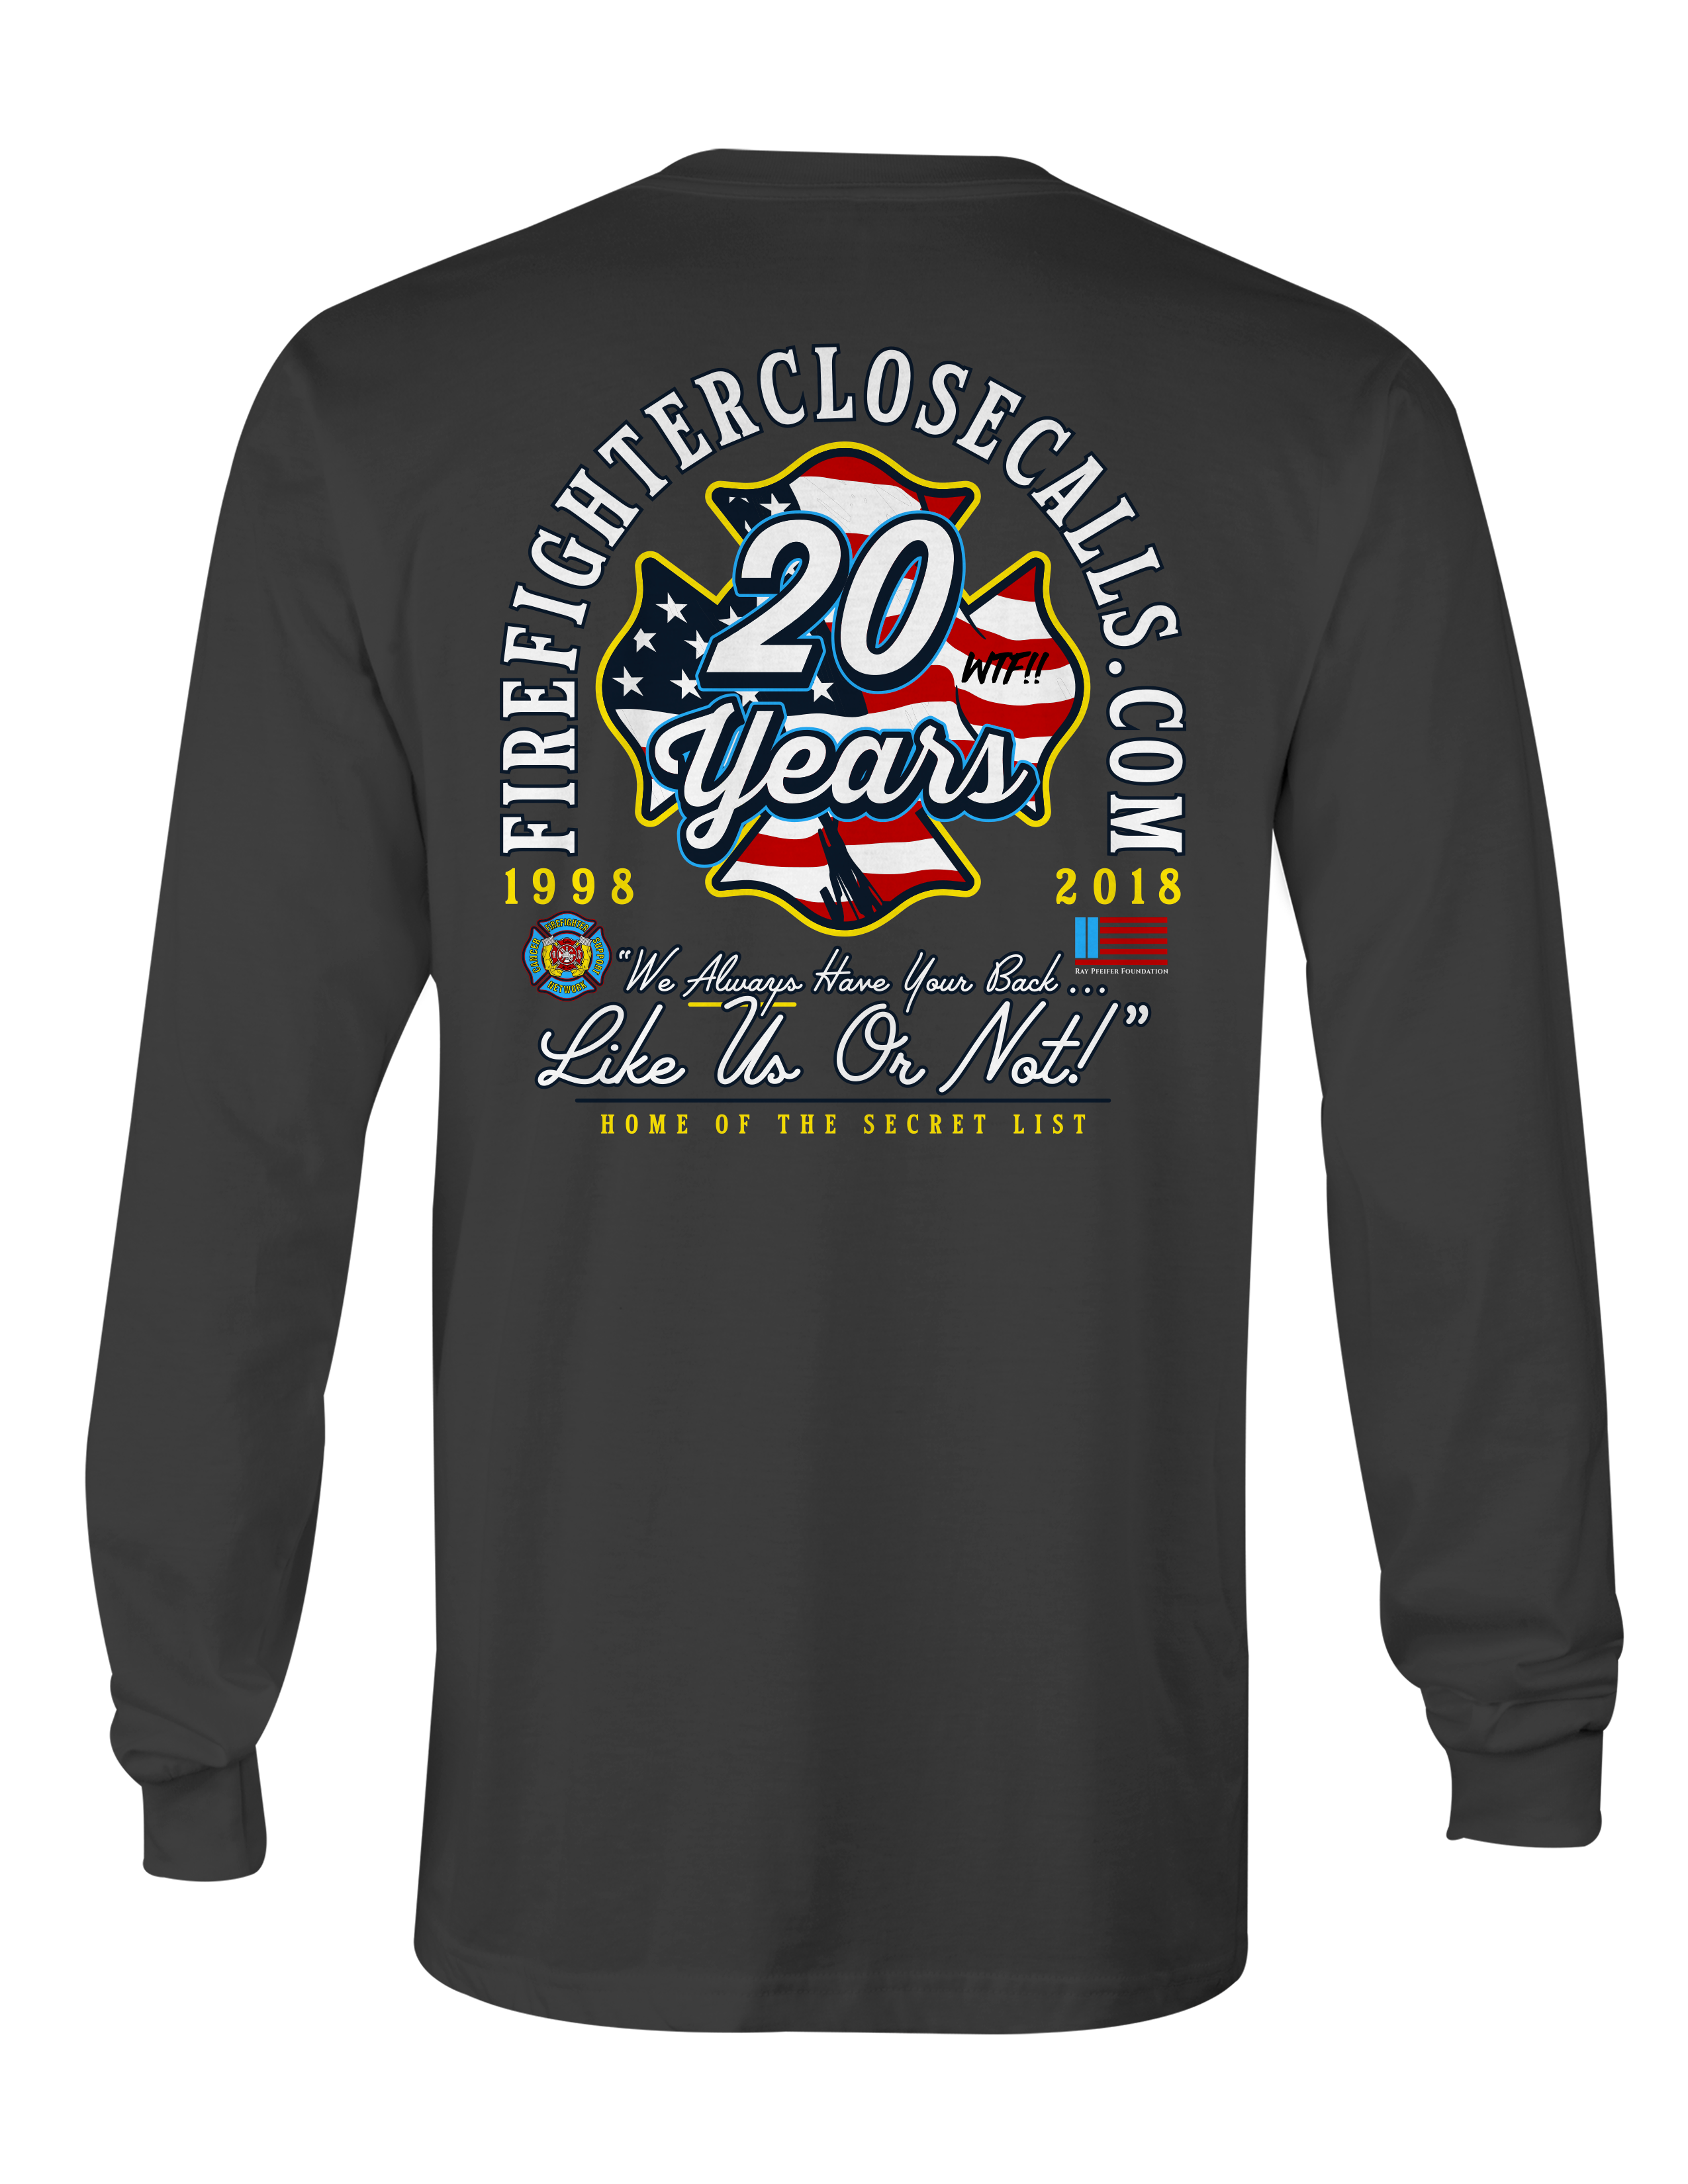 FireFightersclosecalls.com 20th Anniversary Charity Tee Long Sleeve